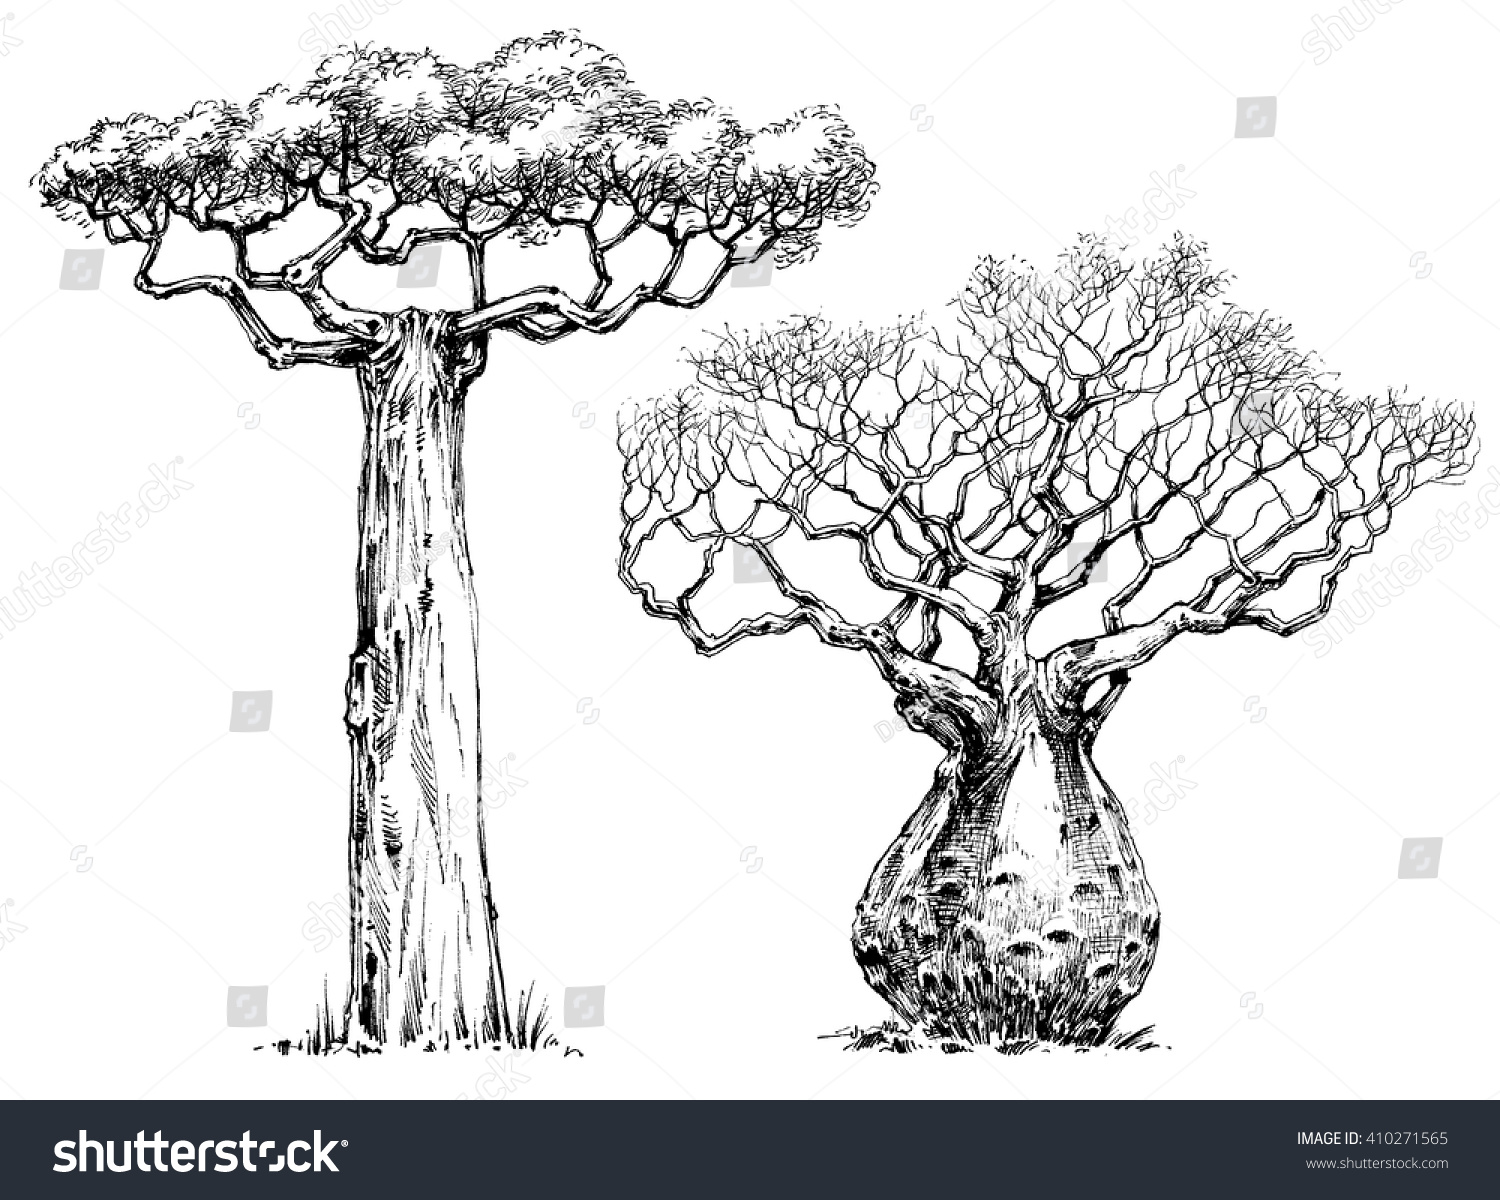 SVG of African iconic tree, baobab tree svg